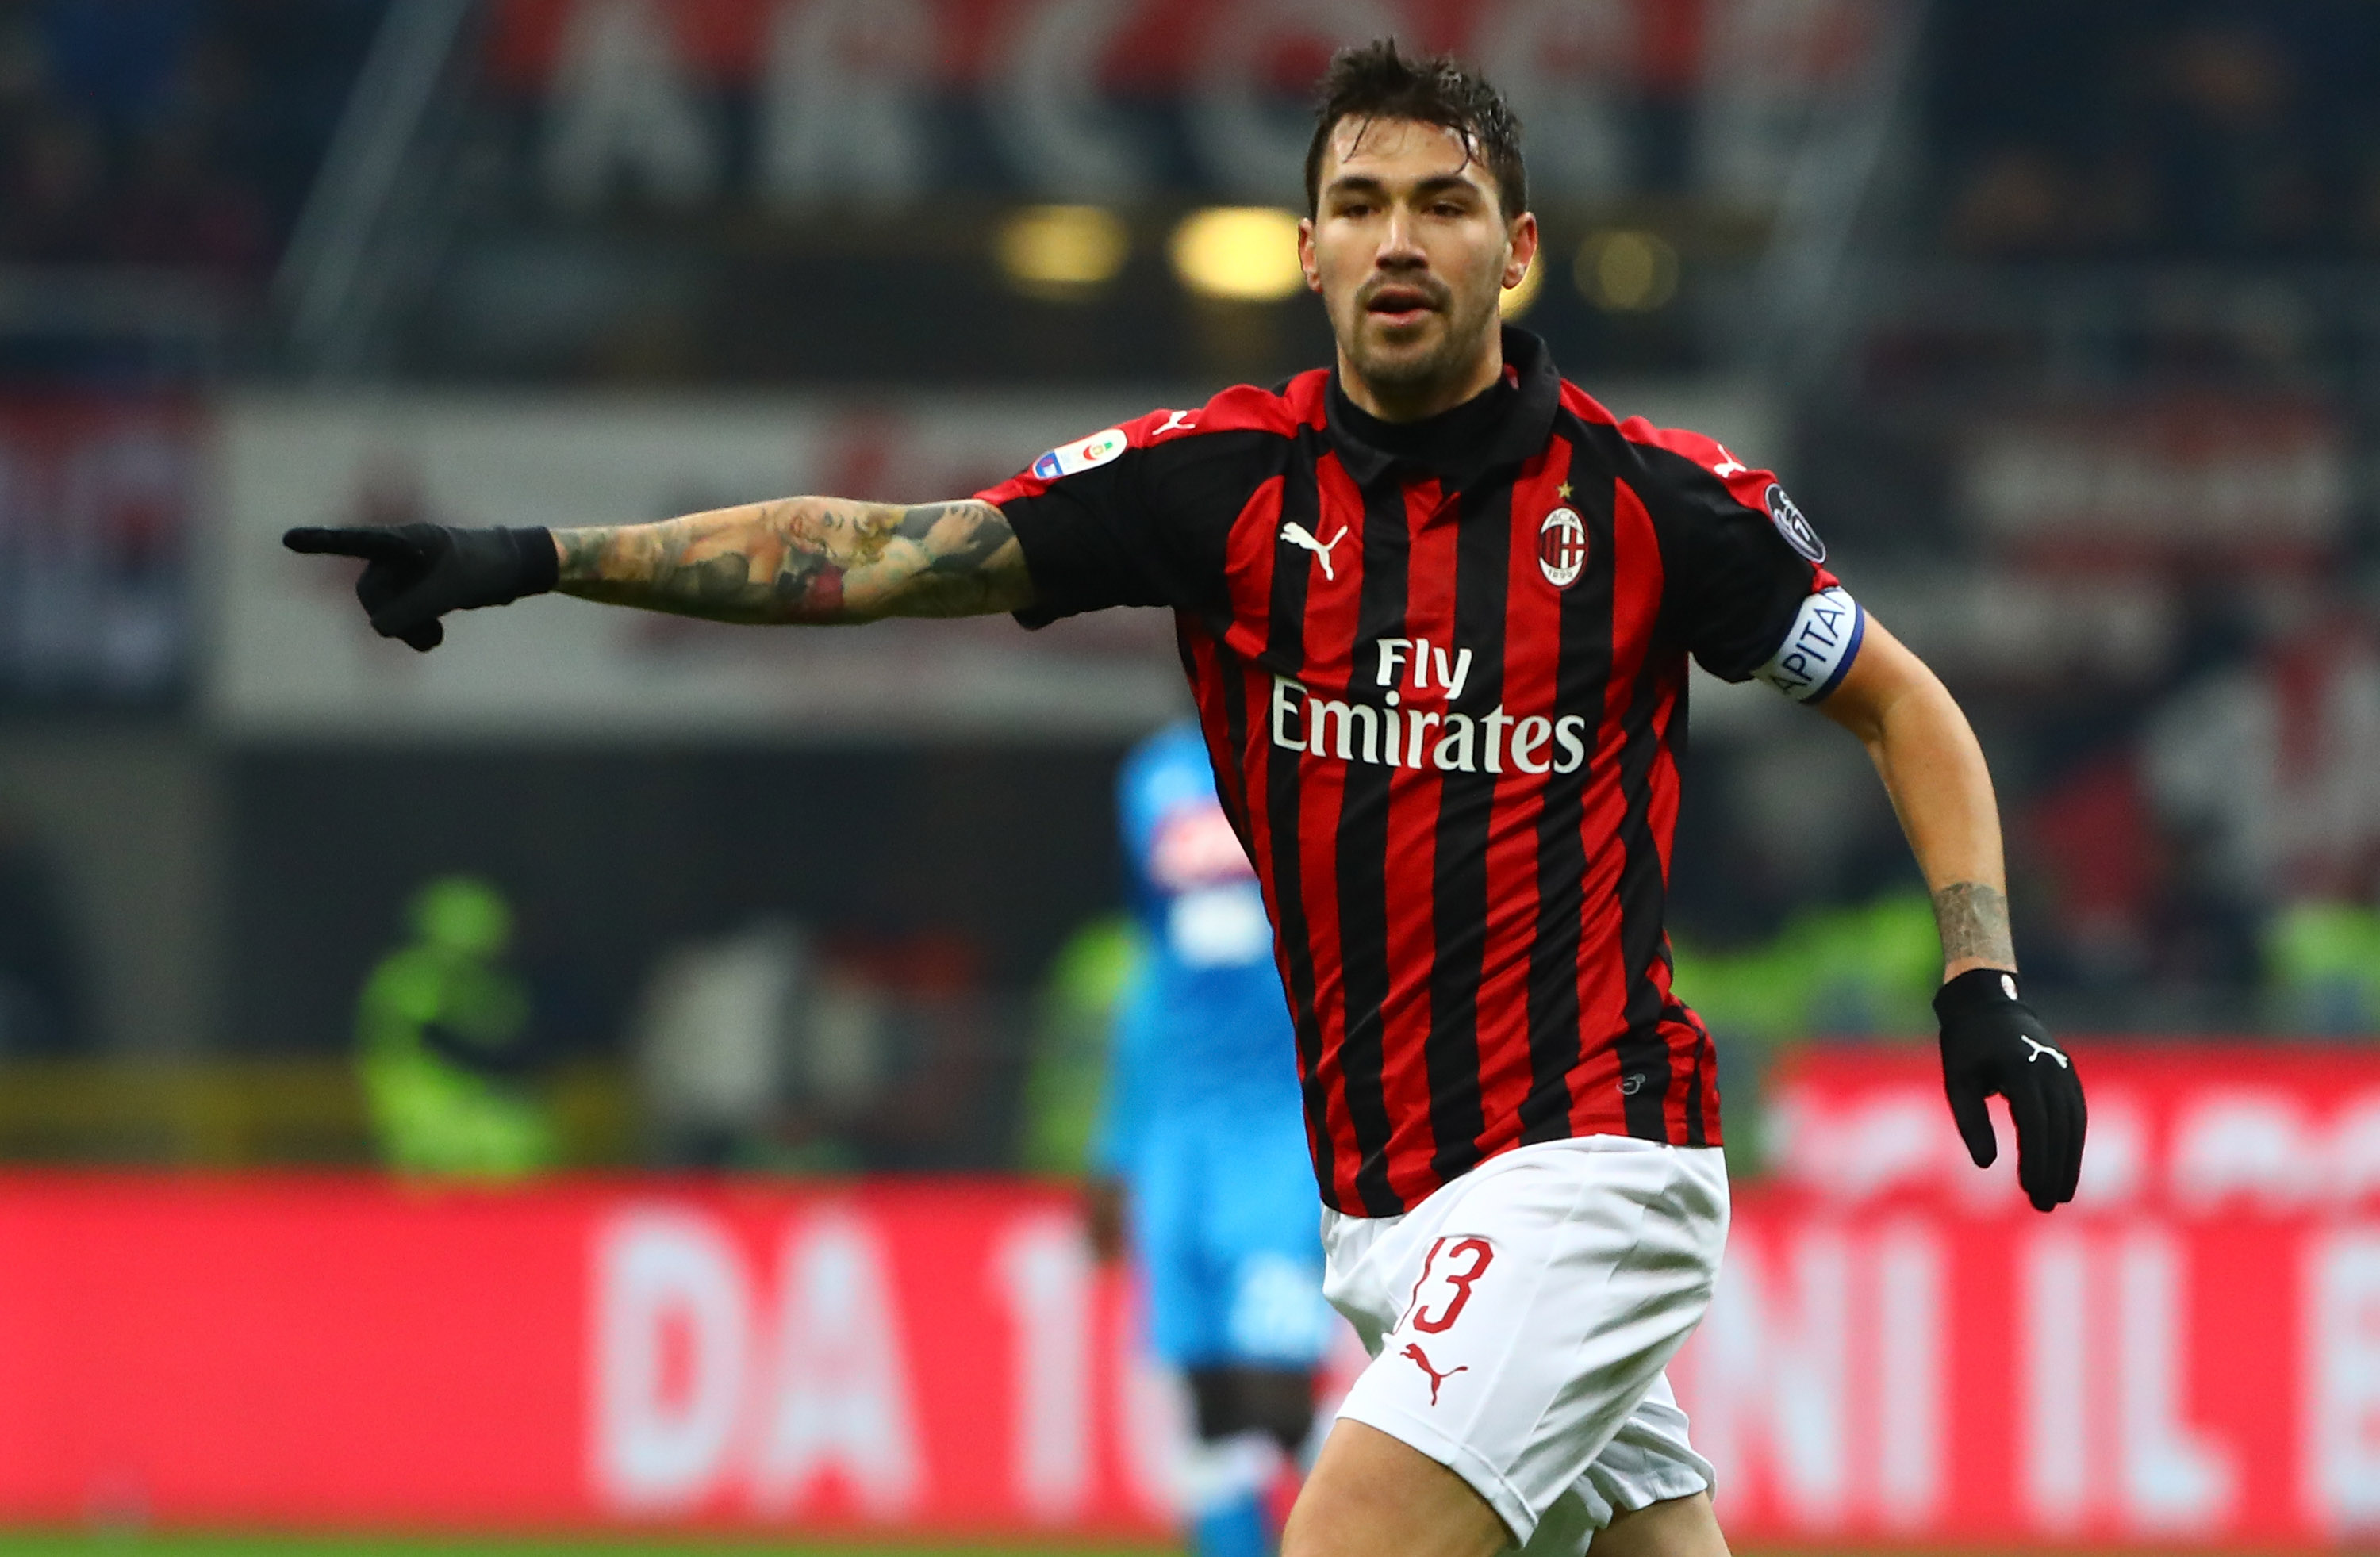 Romagnoli is back after serving his suspension (Photo by Marco Luzzani/Getty Images)